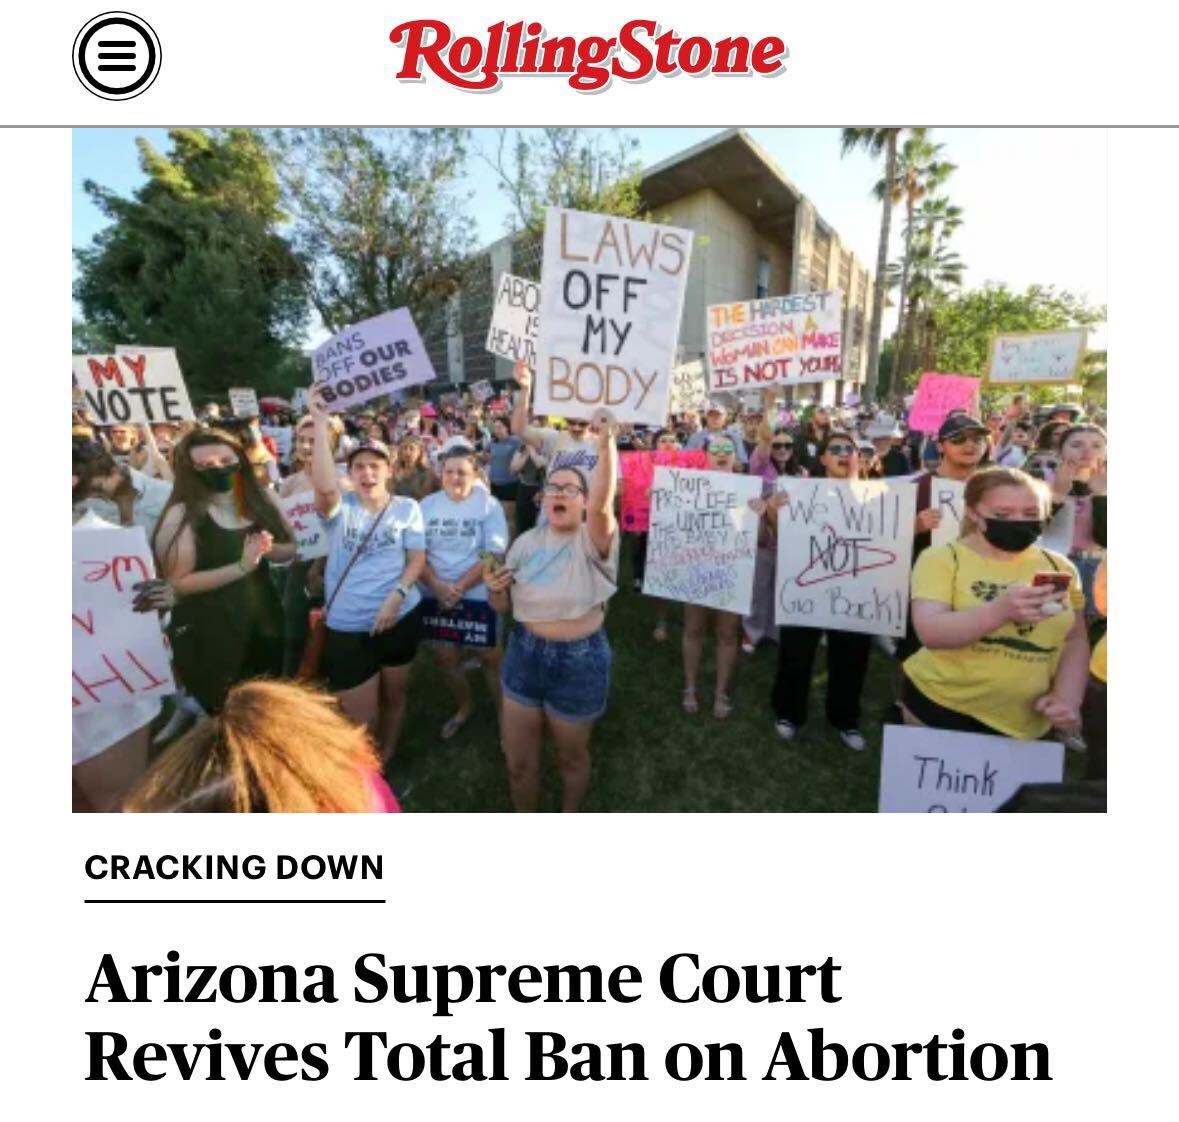 BREAKING: The Arizona Supreme Court has revived an 1864 criminal ban on abortion. Story: rollingstone.com/politics/polit…